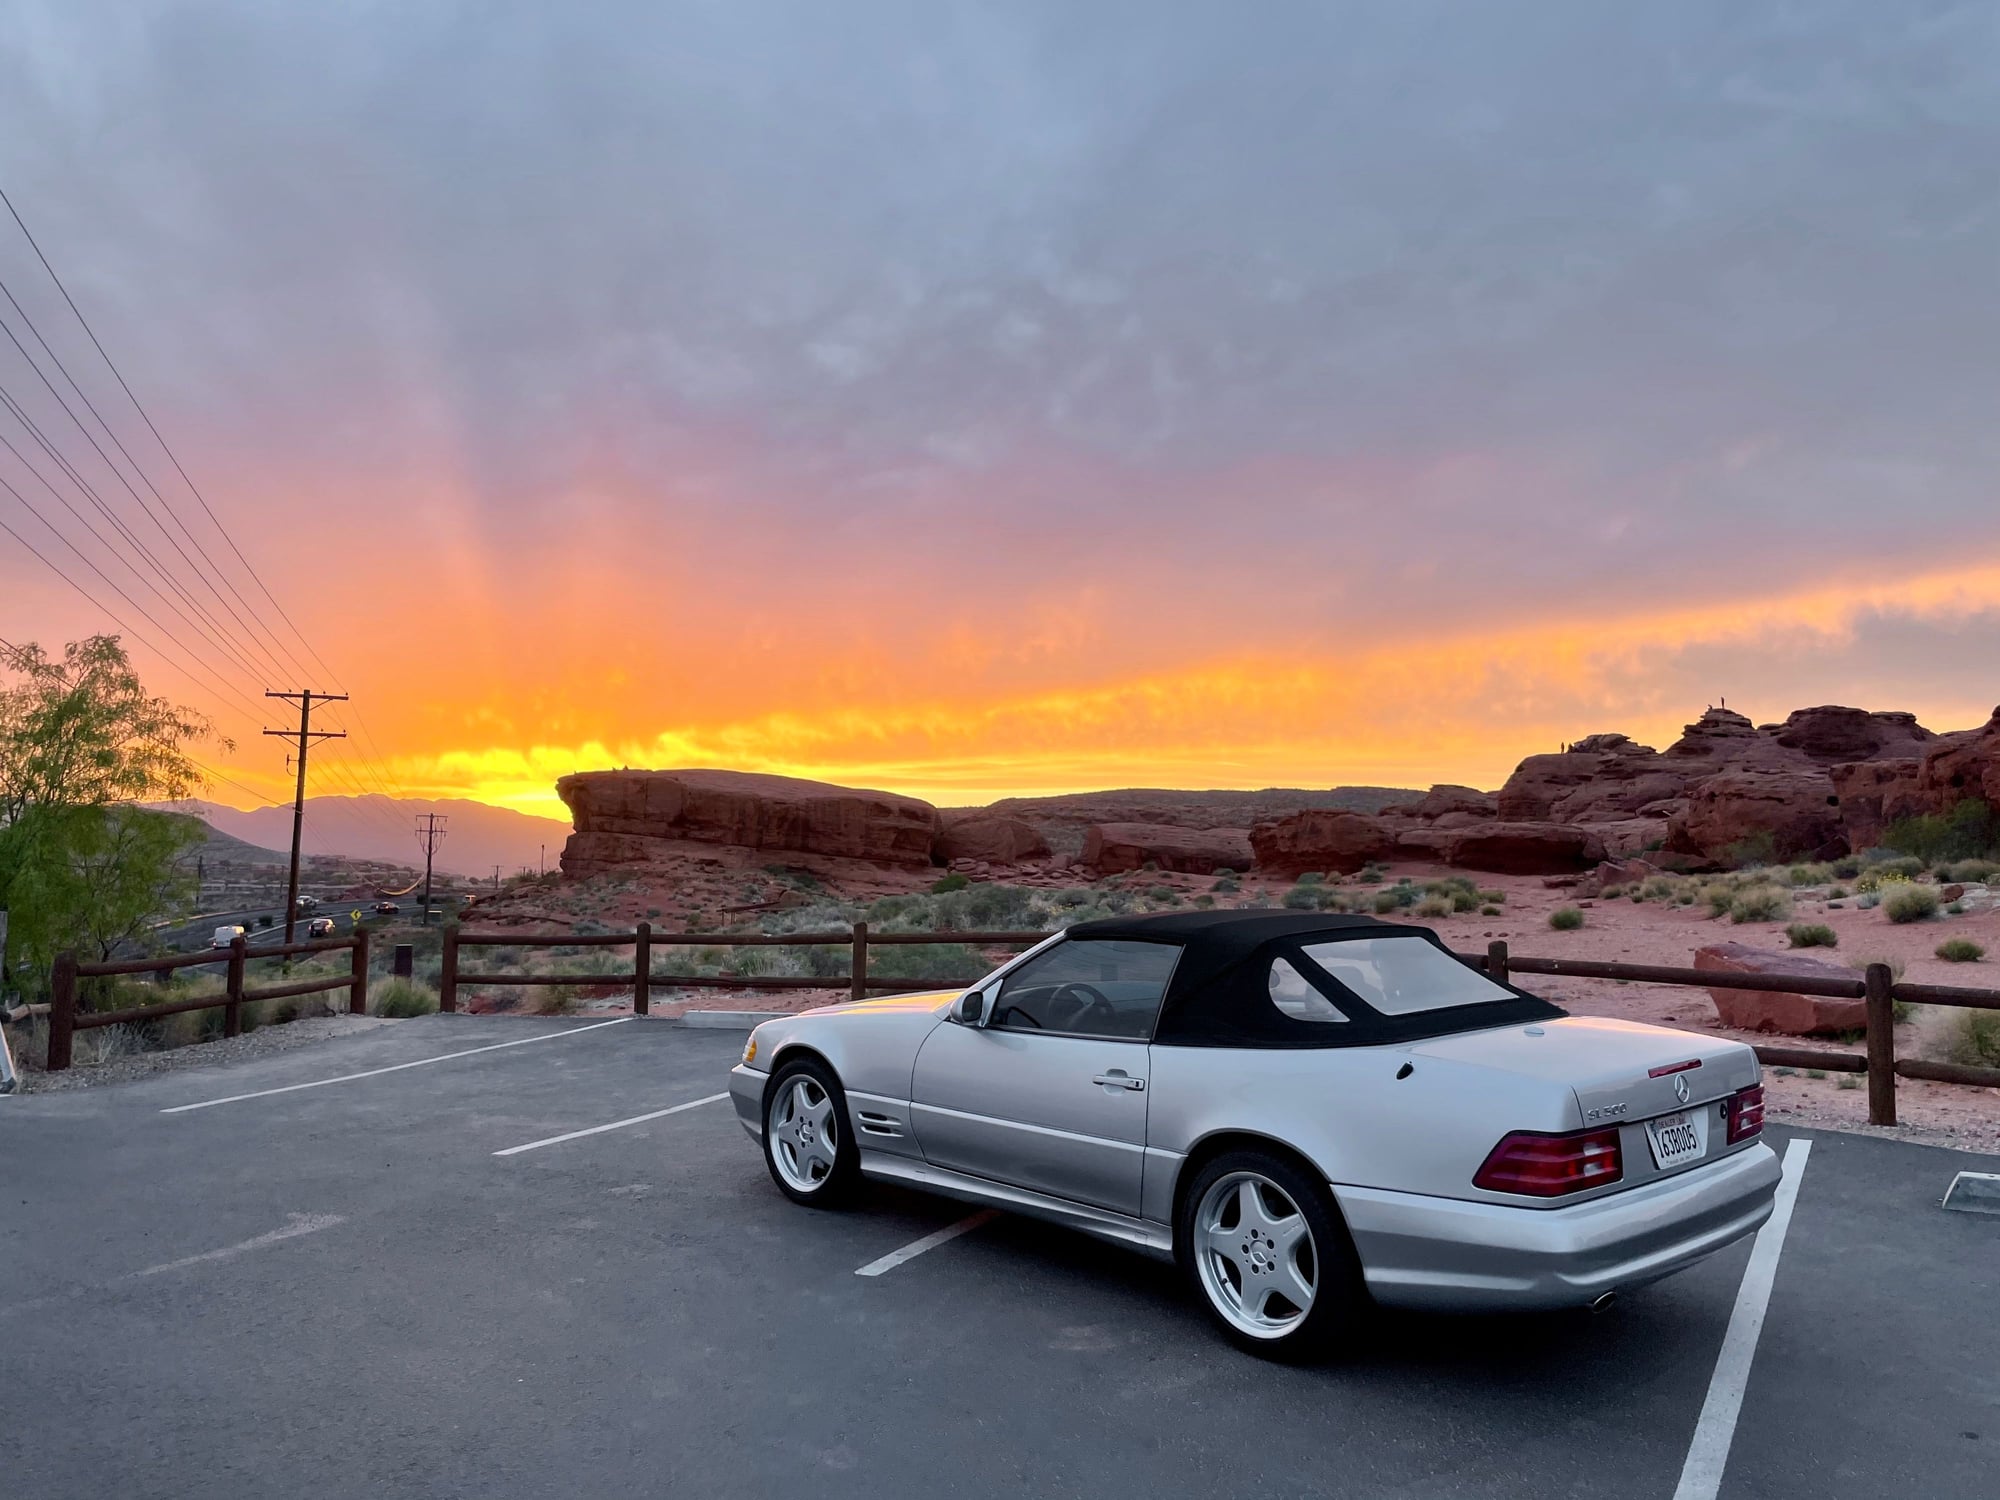 2001 Mercedes-Benz SL500 - 2001 Mercedes SL500 - 88k miles - Immaculate Condition - Used - VIN WDBFA68F01F197641 - 88,327 Miles - 8 cyl - 2WD - Automatic - Convertible - Silver - St. George, Ut, UT 84790, United States